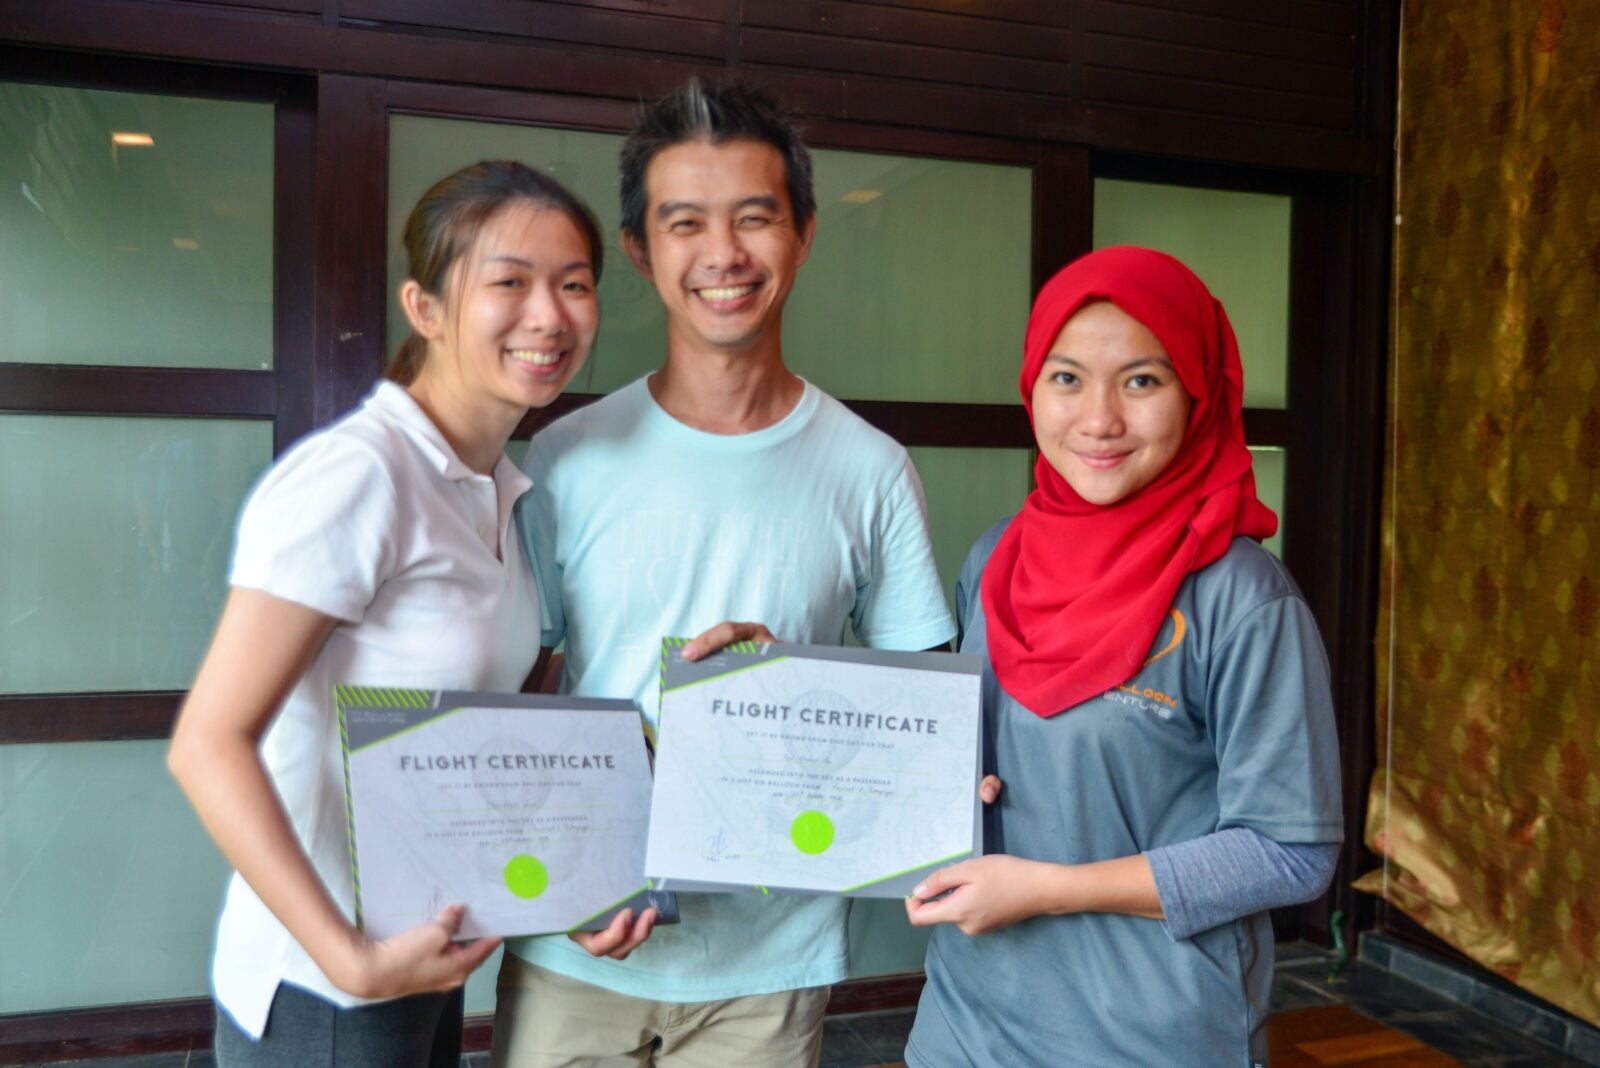 A Chinese Couple Posing With Their Flight Certificate Which Is Given By A Malay Woman In Red Hijab.